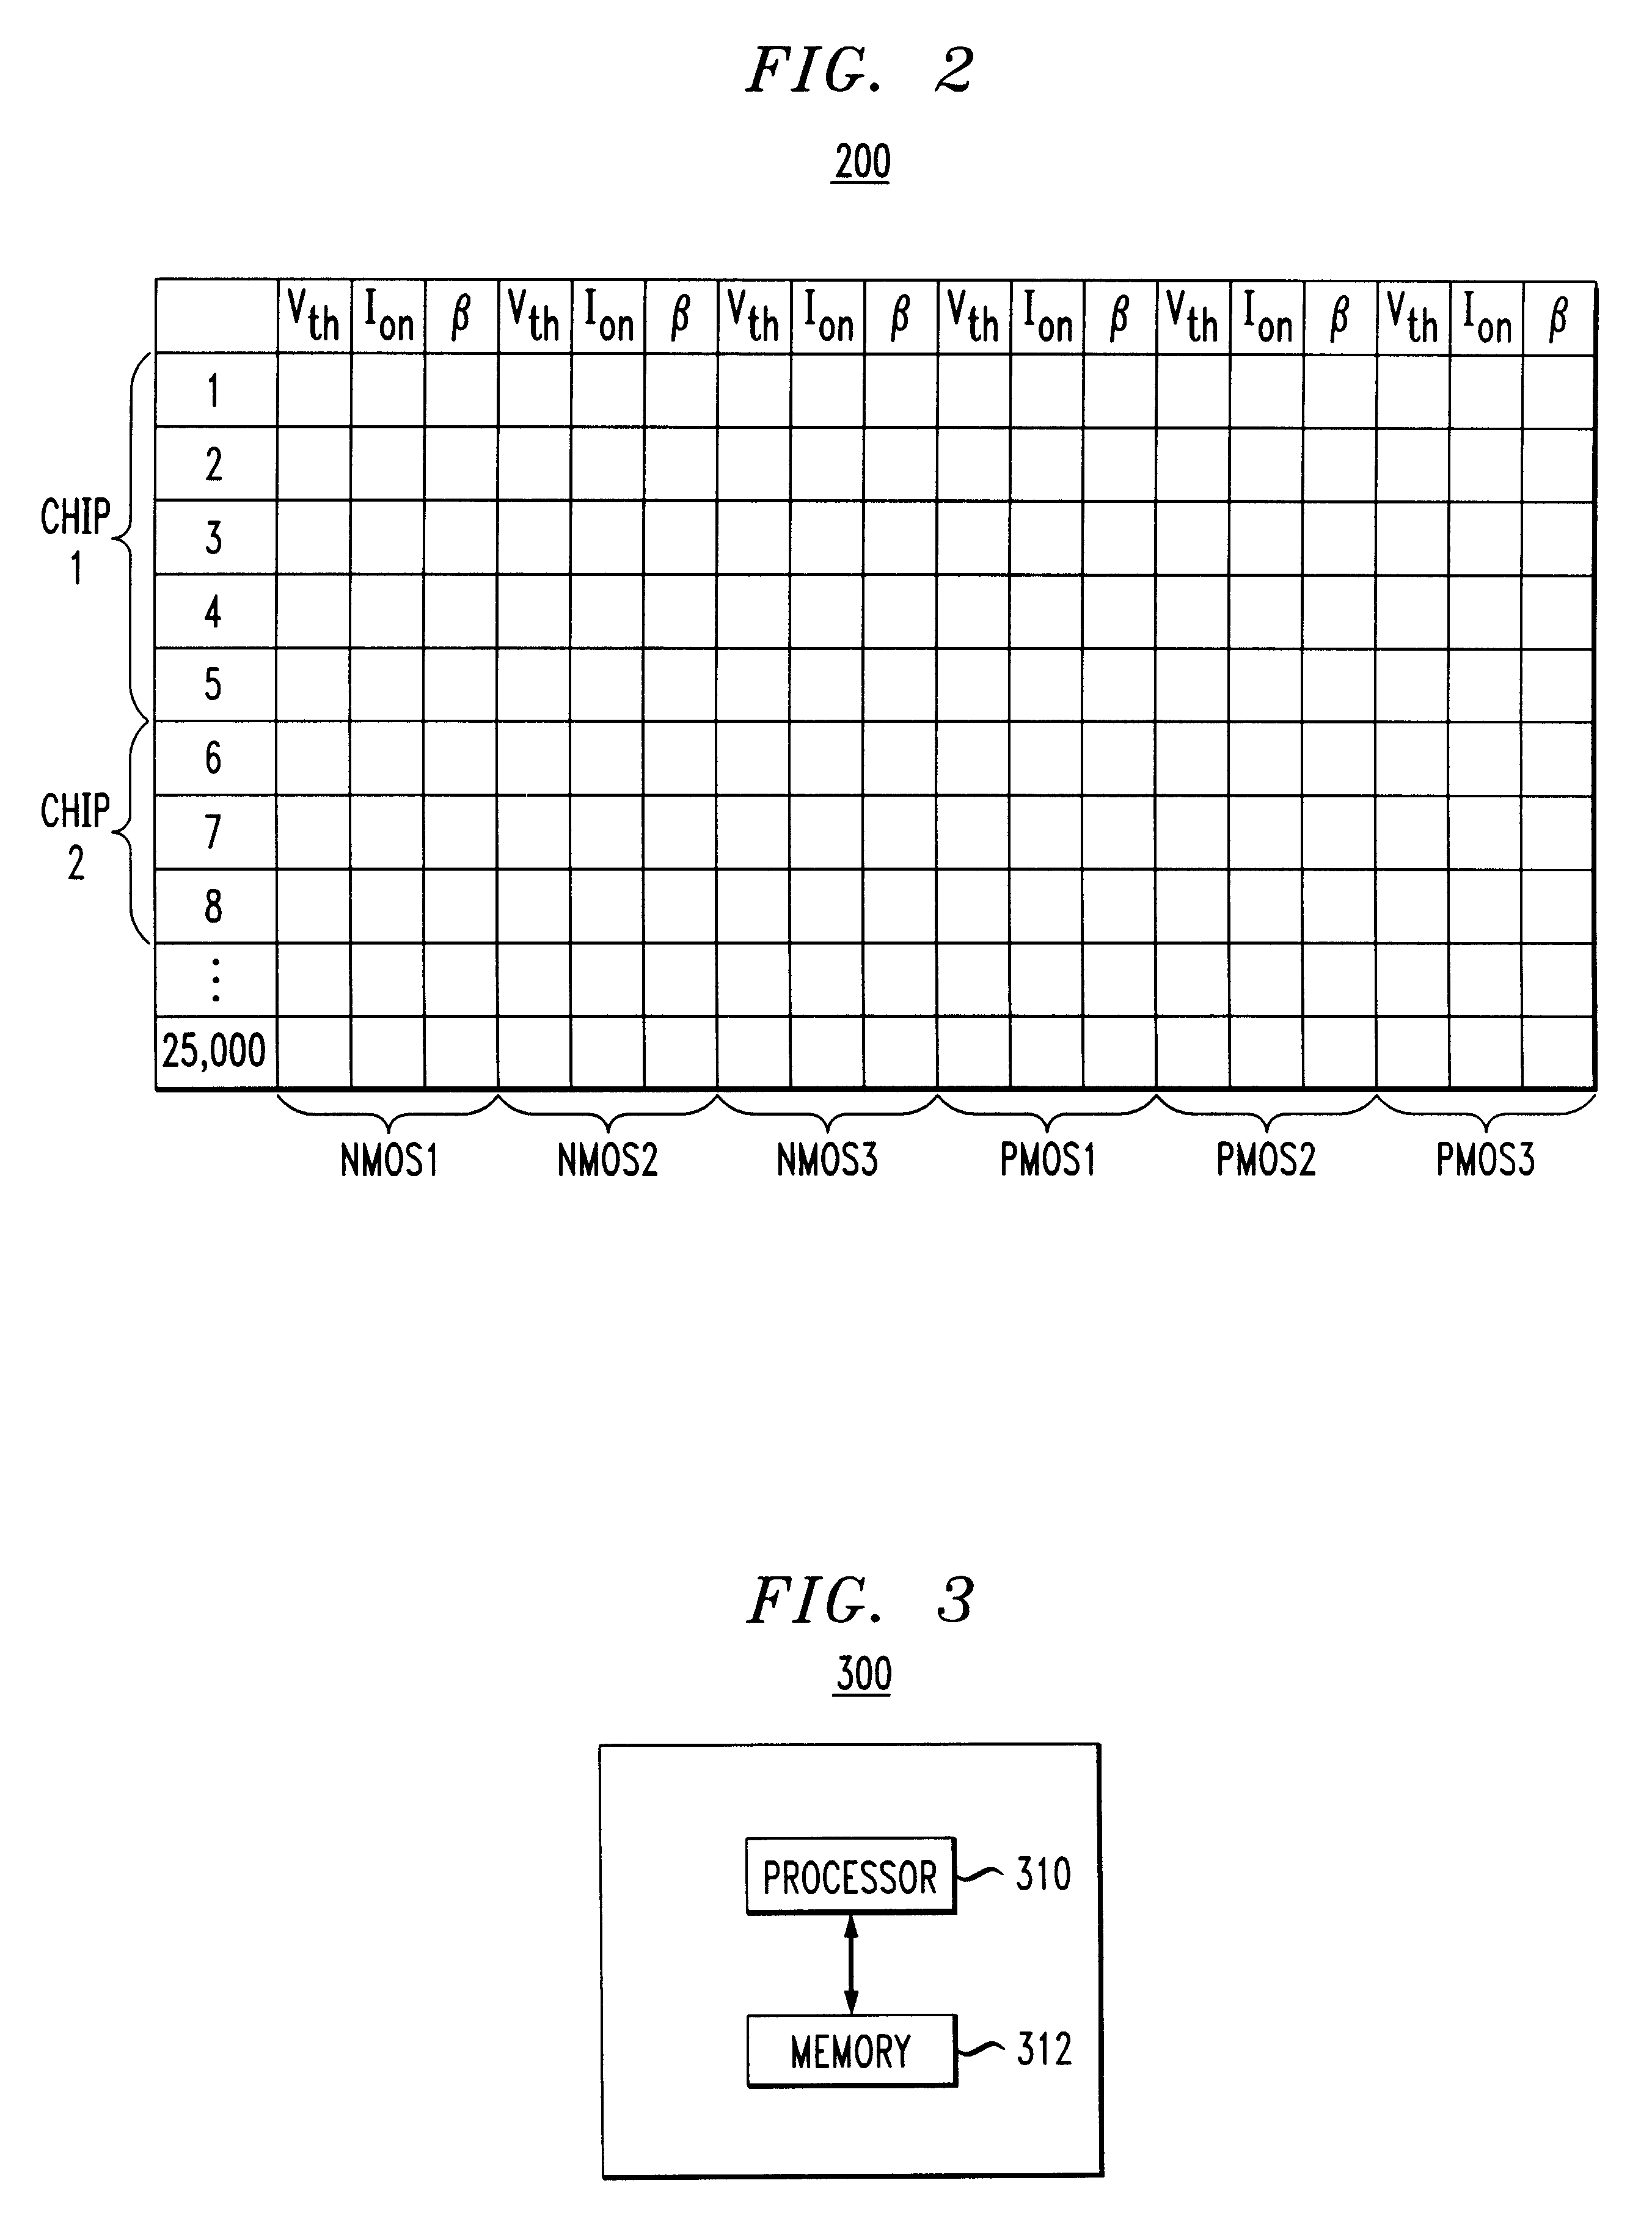 Deriving statistical device models from electrical test data